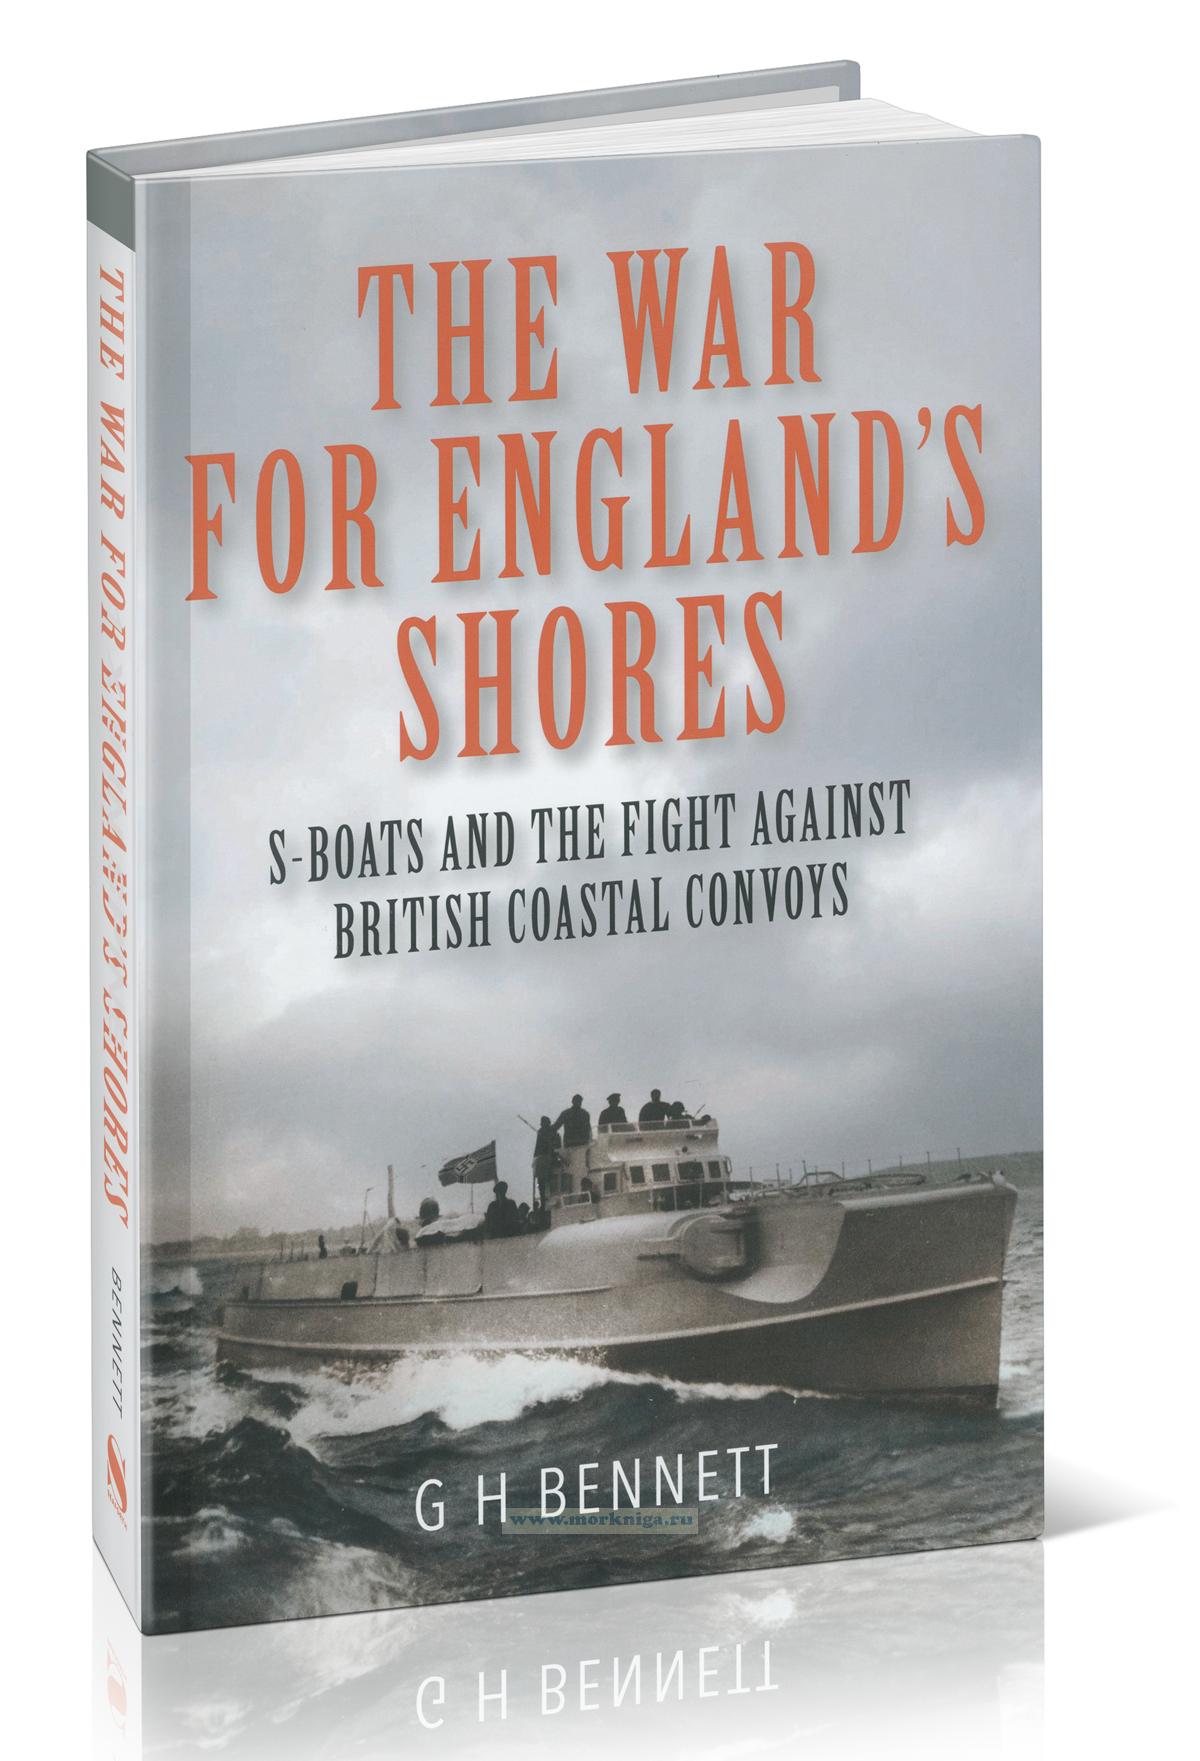 The War for England's Shores. S-Boats and the Fight against British Coastal Convoys